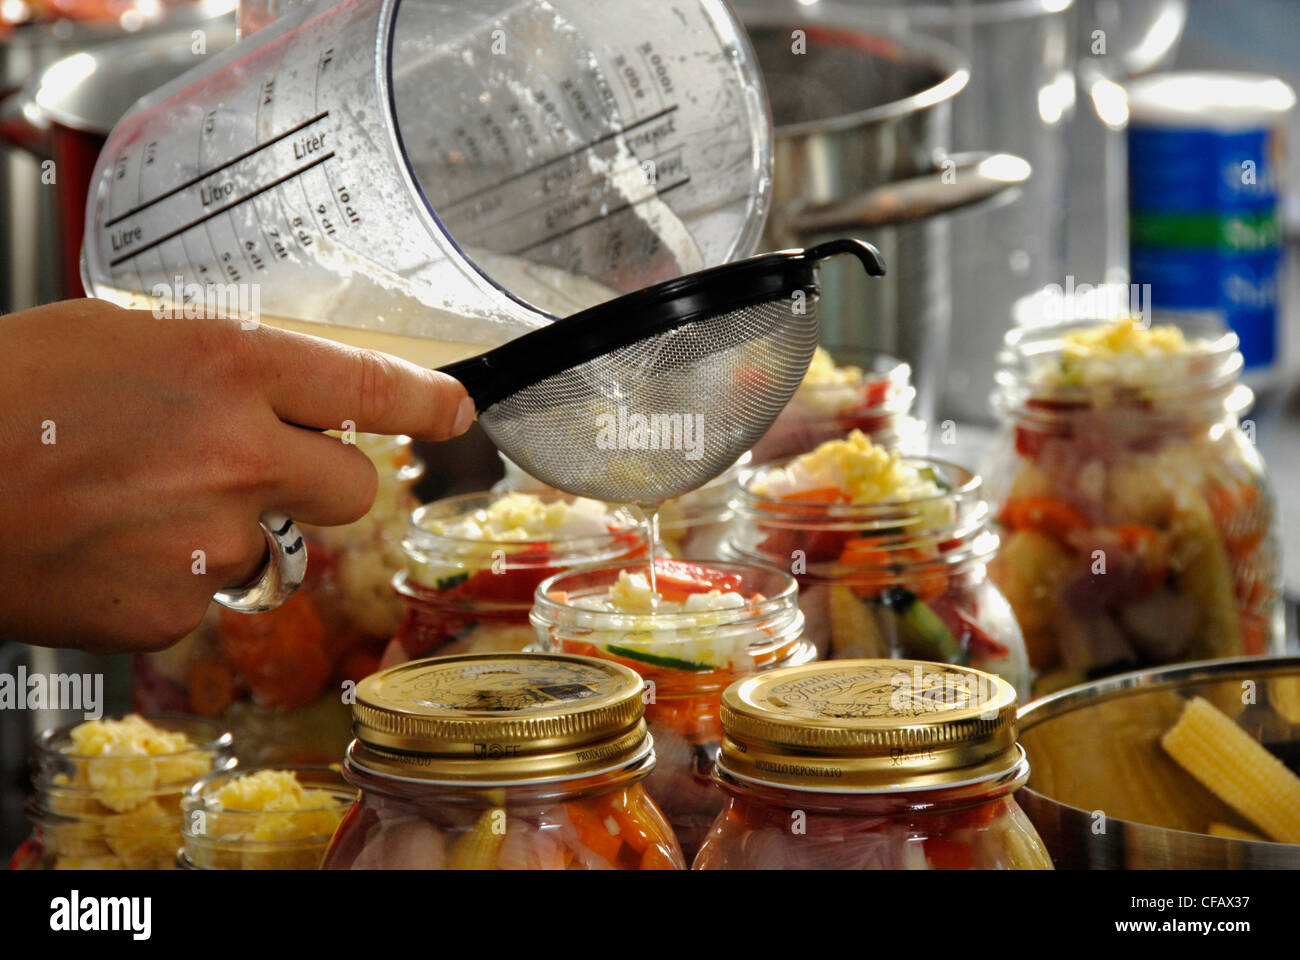 Preservation, vegetables, preserving, long-lasting, durable, food, eating, cook, tradition Stock Photo